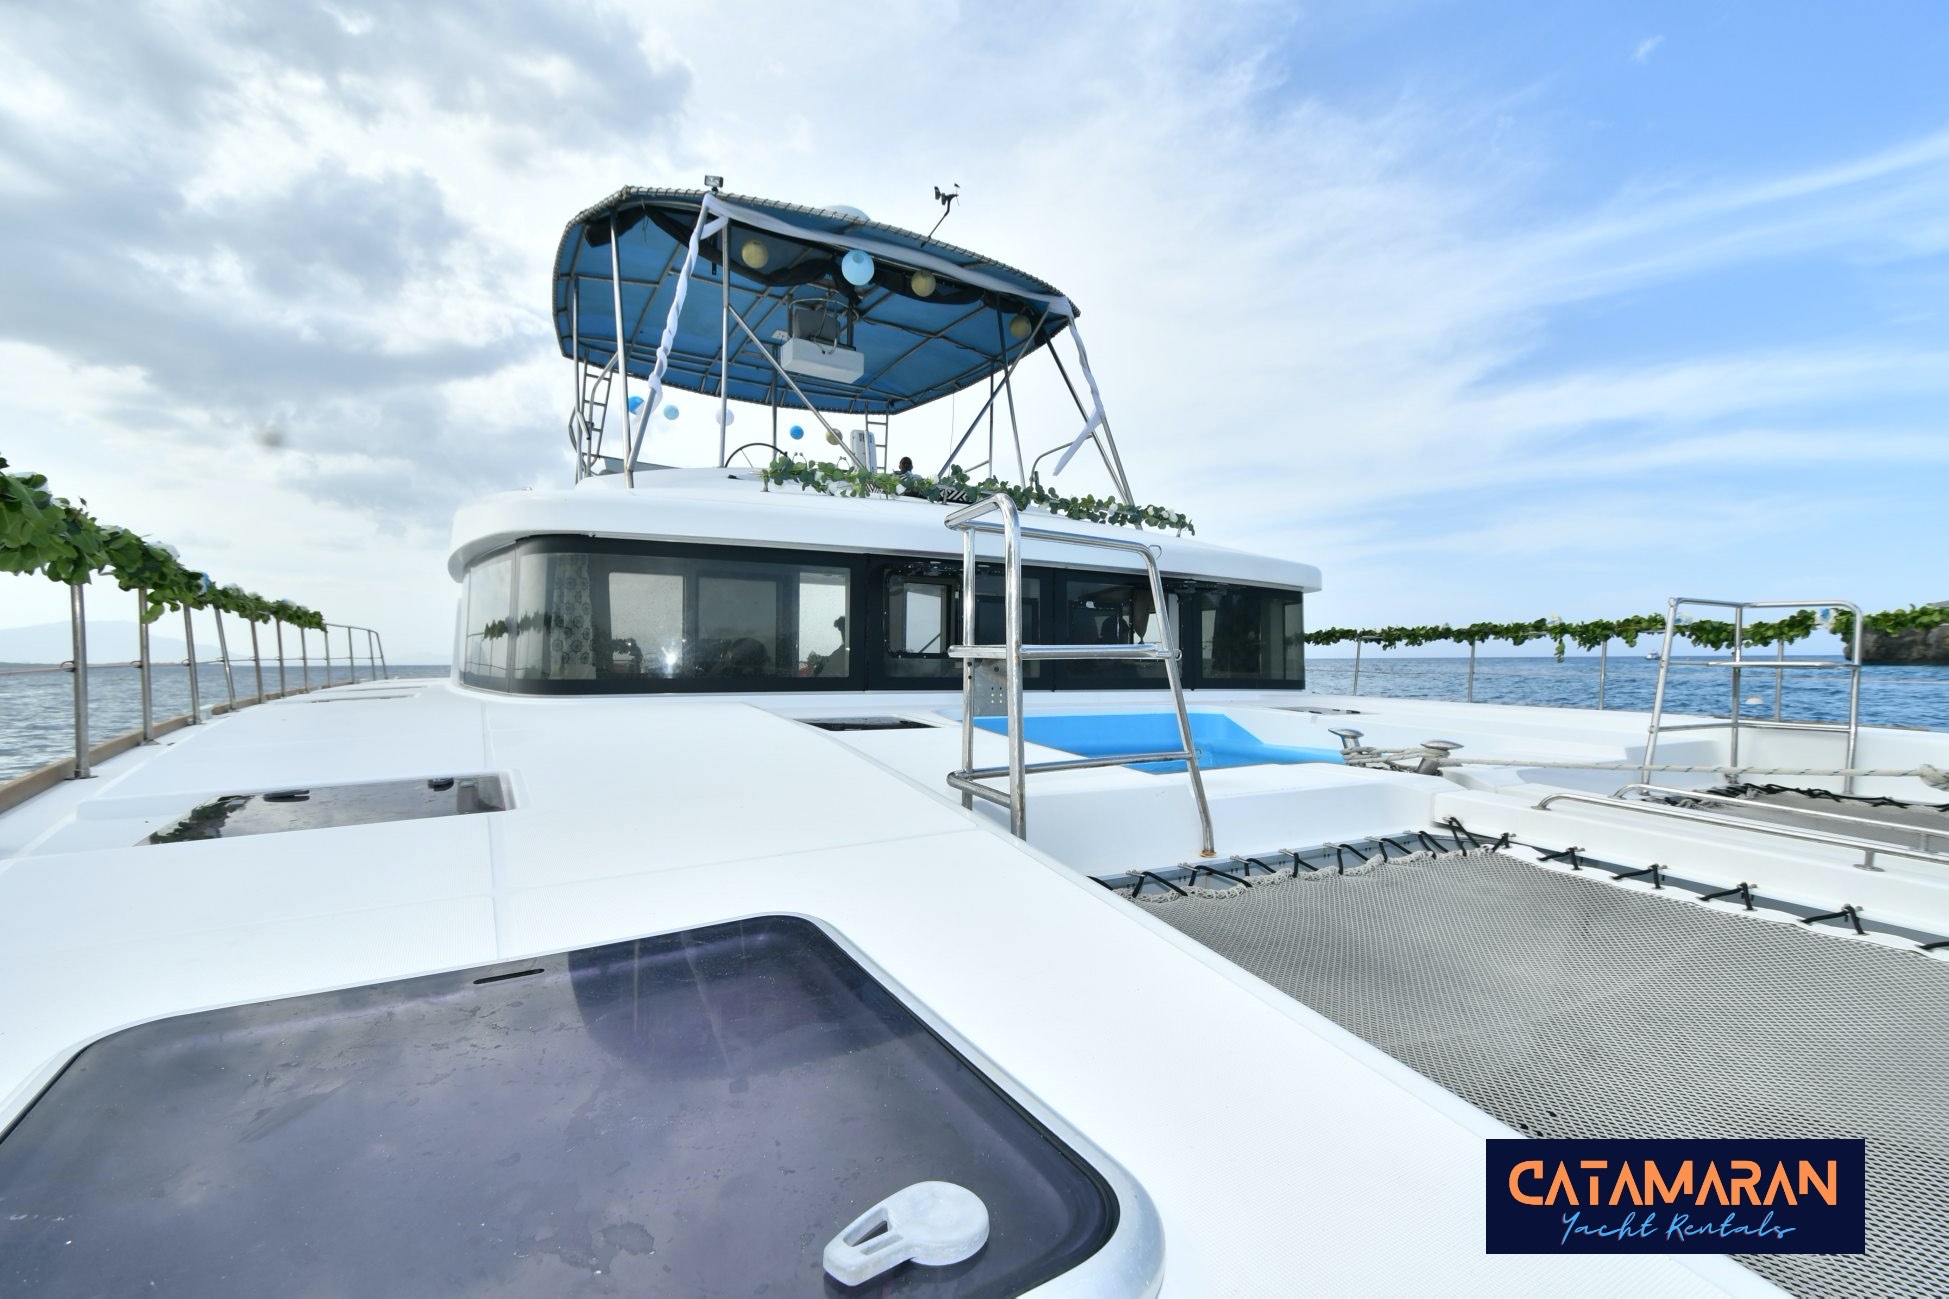 The aft section of the catamaran